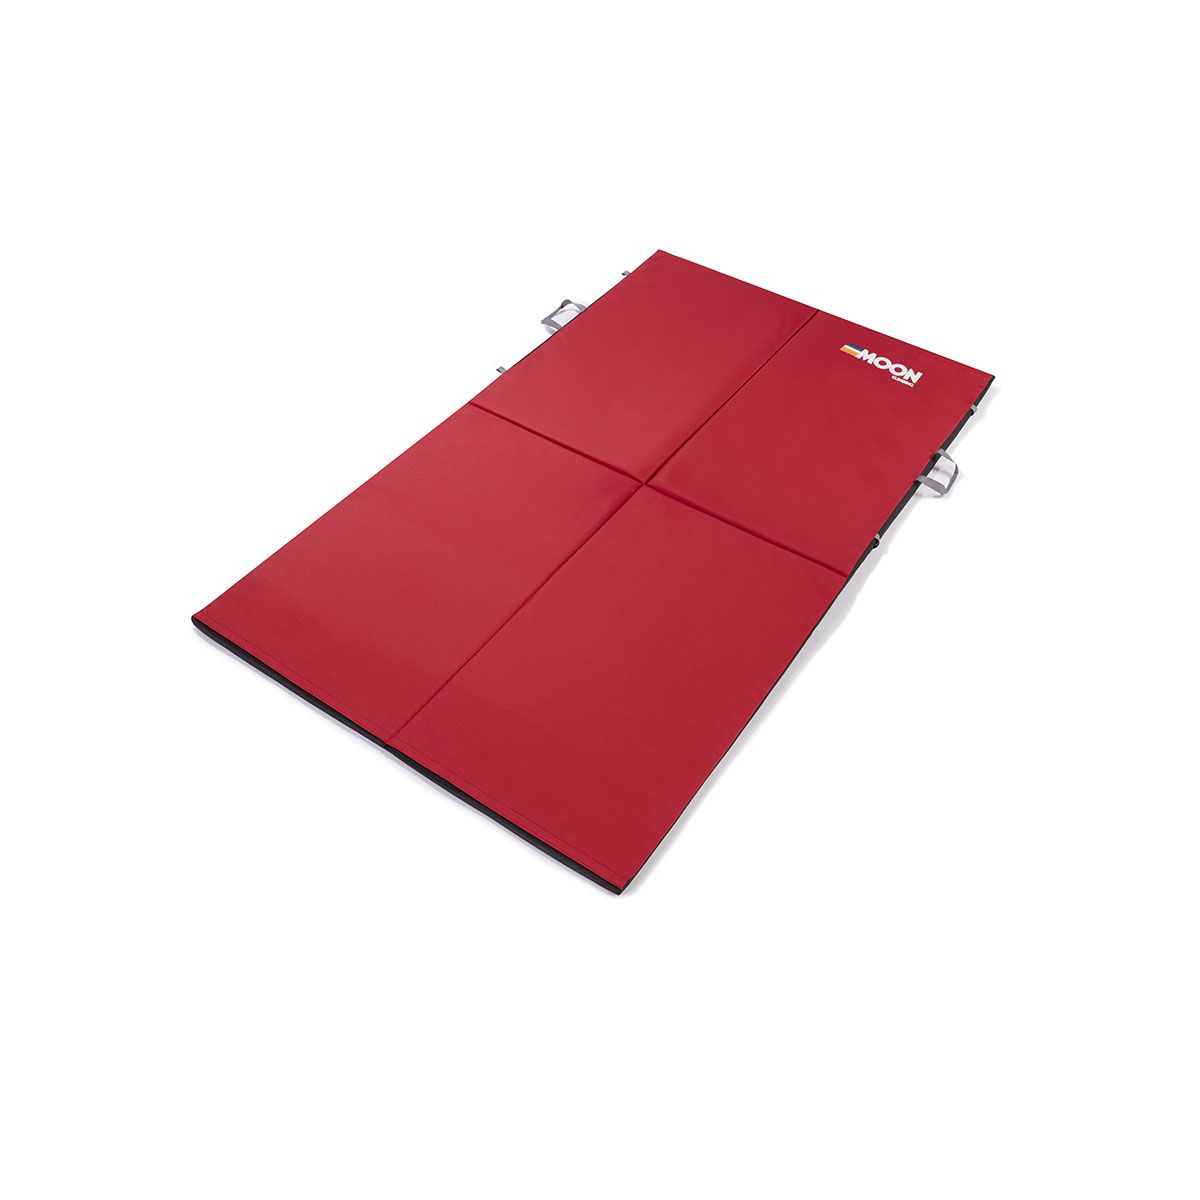 Moon Cirrus Bouldering Pad, Red, Open